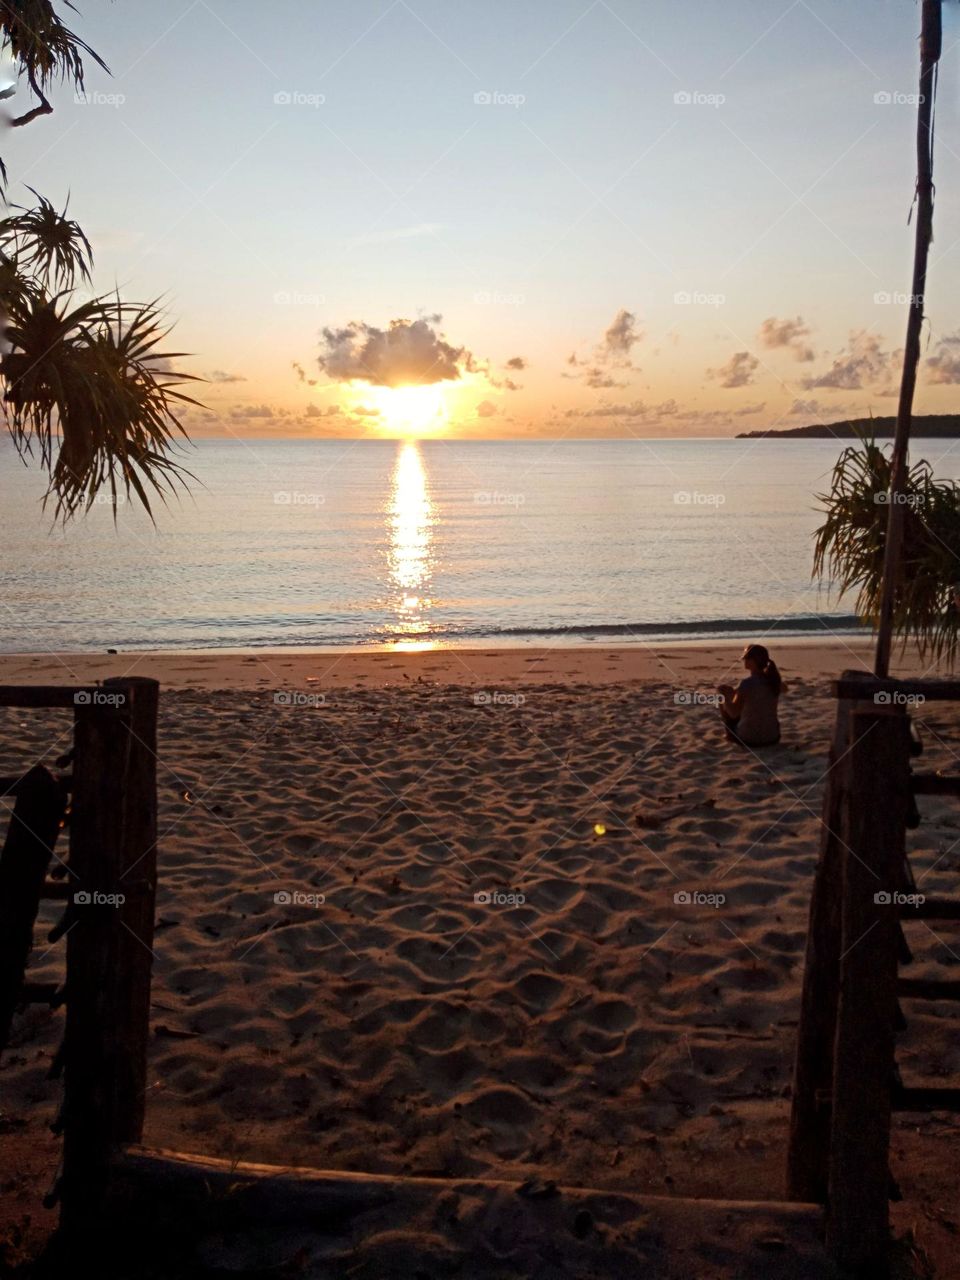 Watching the sunset in Tutuala beach, Timor-Leste